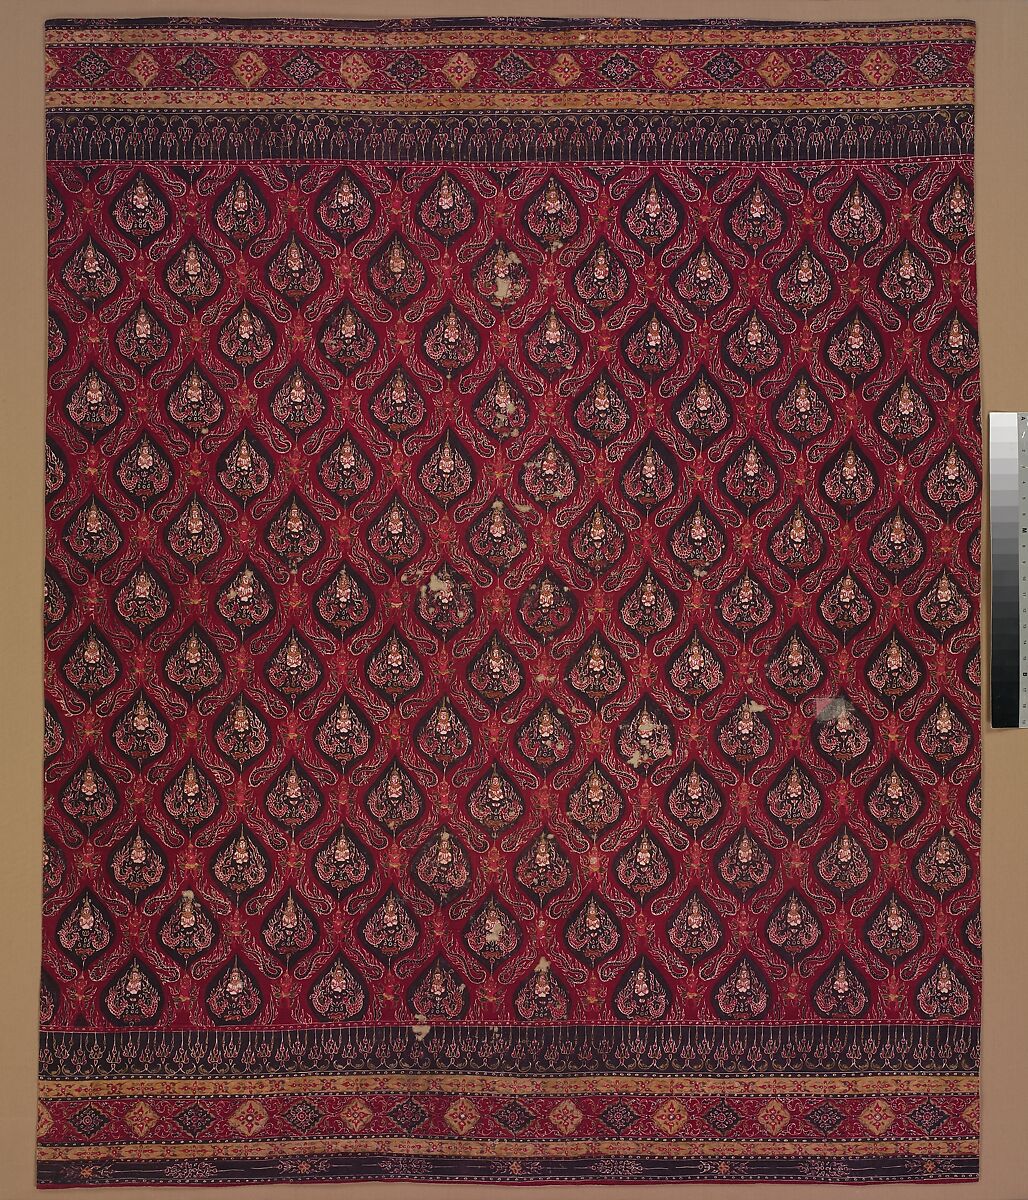 Painted Cotton with Celestial Deva Design in a Trellis Pattern, Painted and mordant-dyed cotton, India (for the Thai market) 